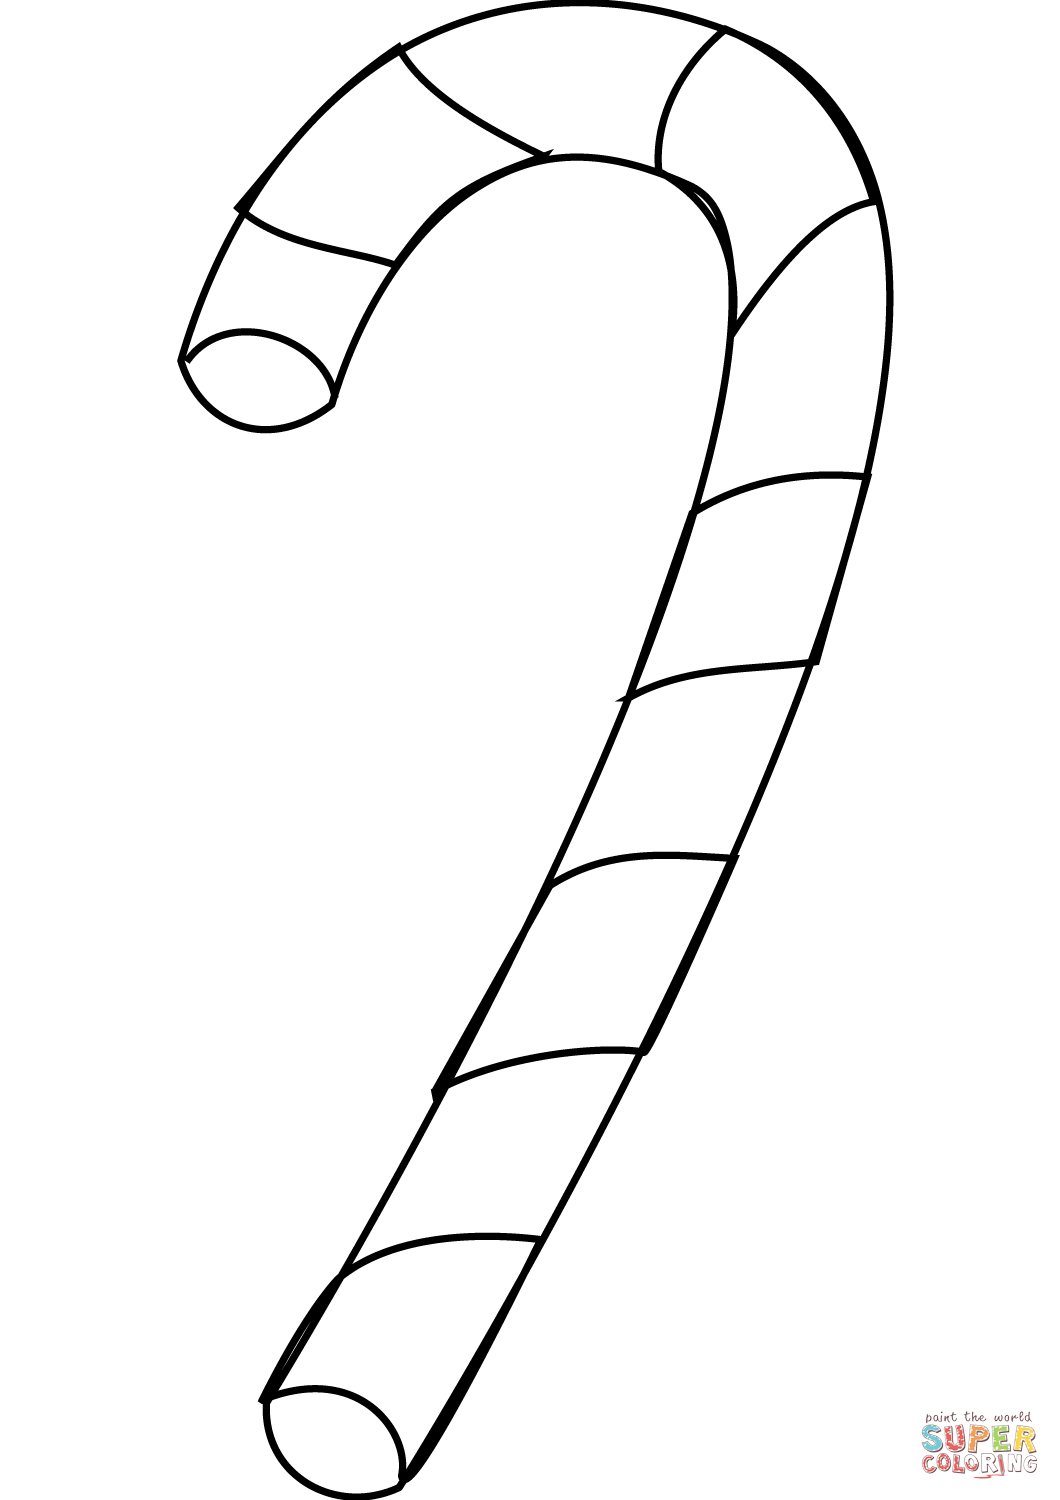 Simple candy cane coloring page free printable coloring pages